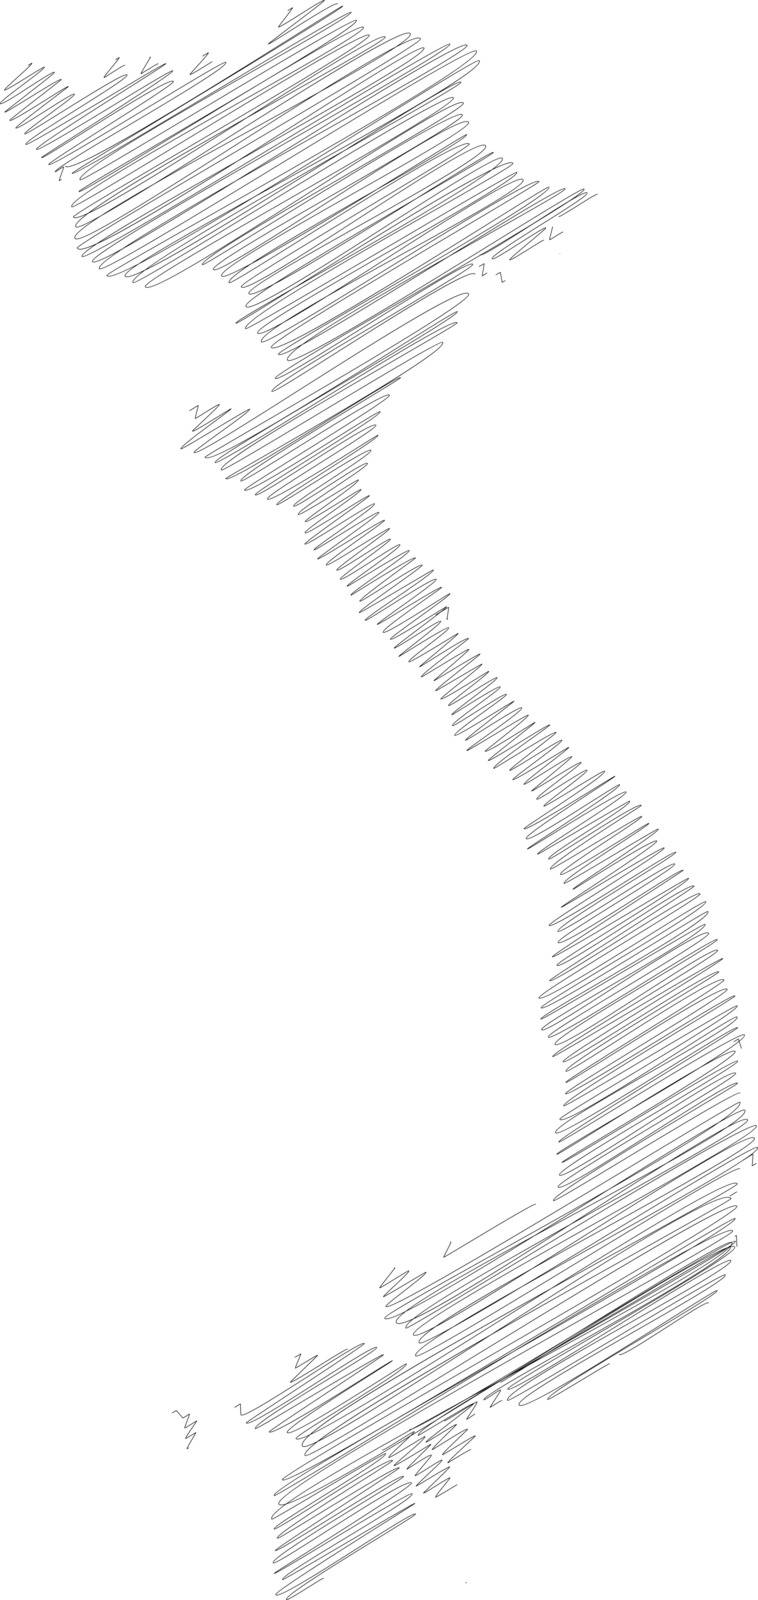 Vietnam - pencil scribble sketch silhouette map of country area with dropped shadow. Simple flat vector illustration by pyty